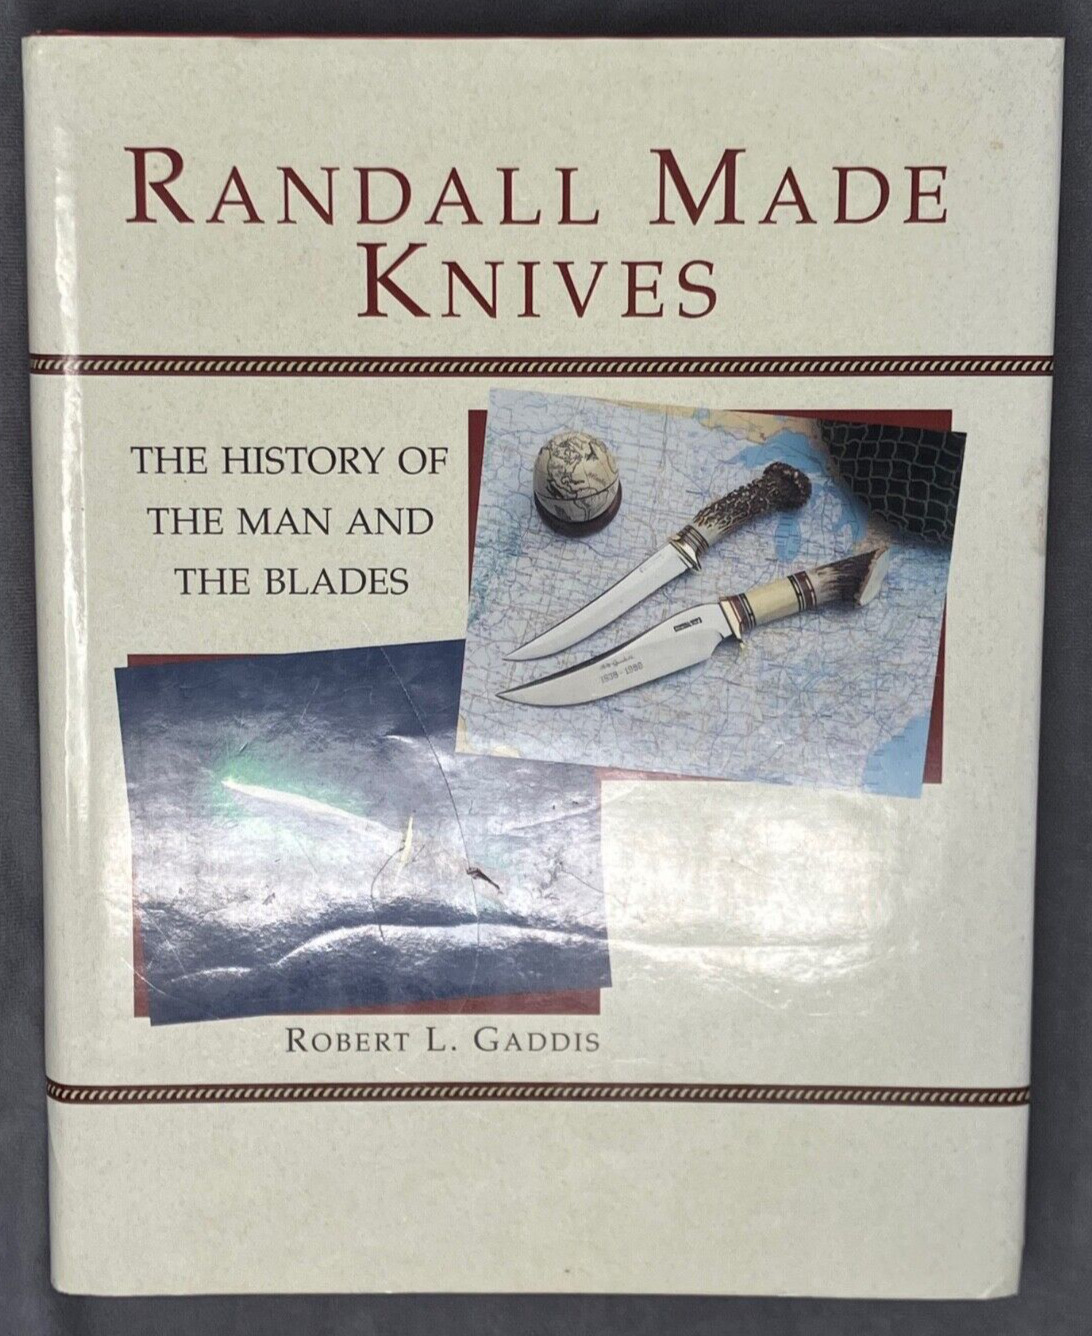 Randall Made Knives, book By Robert L. Gaddis, essential for RMK collectors